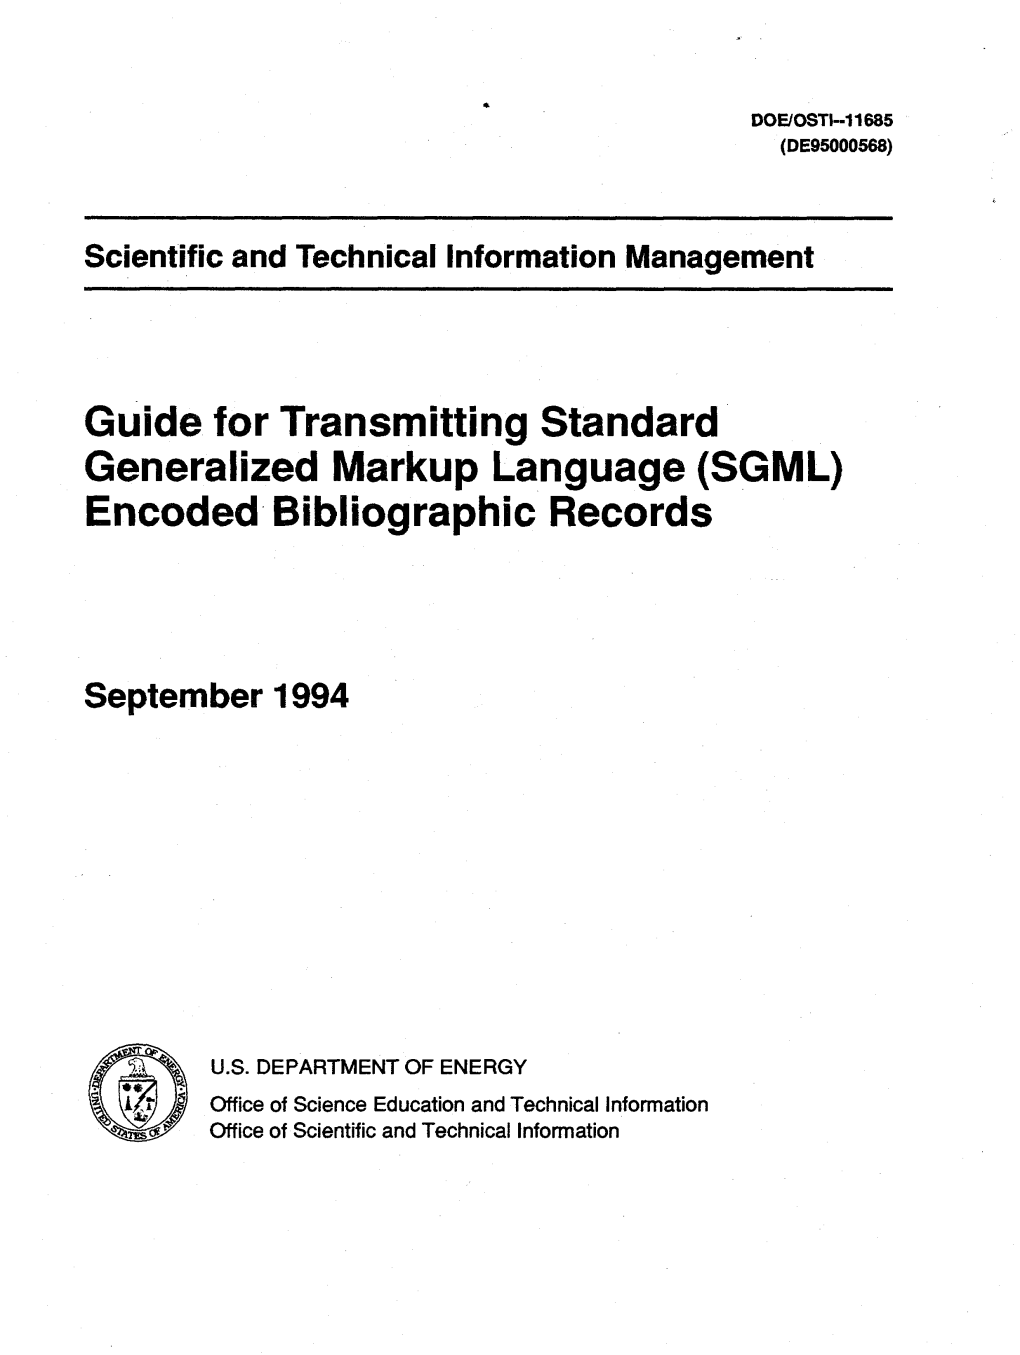 Guide for Transmitting Standard Generalized Markup Language (SGML) Encoded Bibliographic Records